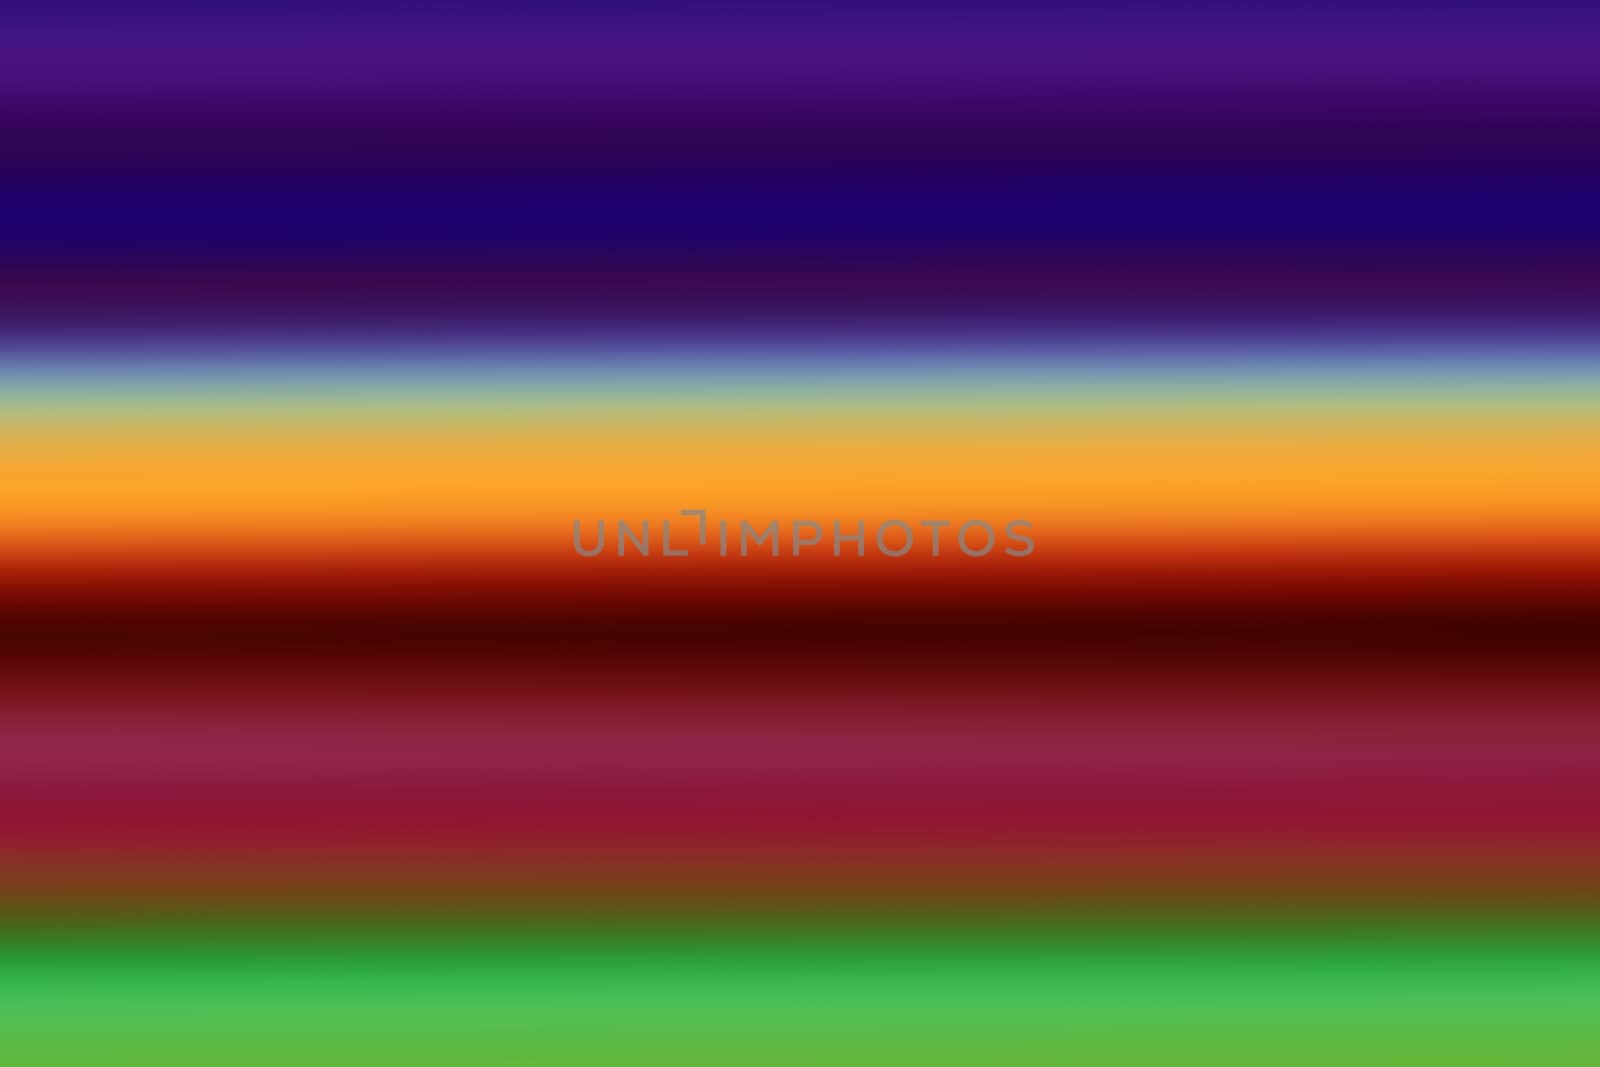 dark rainbow abstract colorful horizontal background, multi colors mixed gradient background